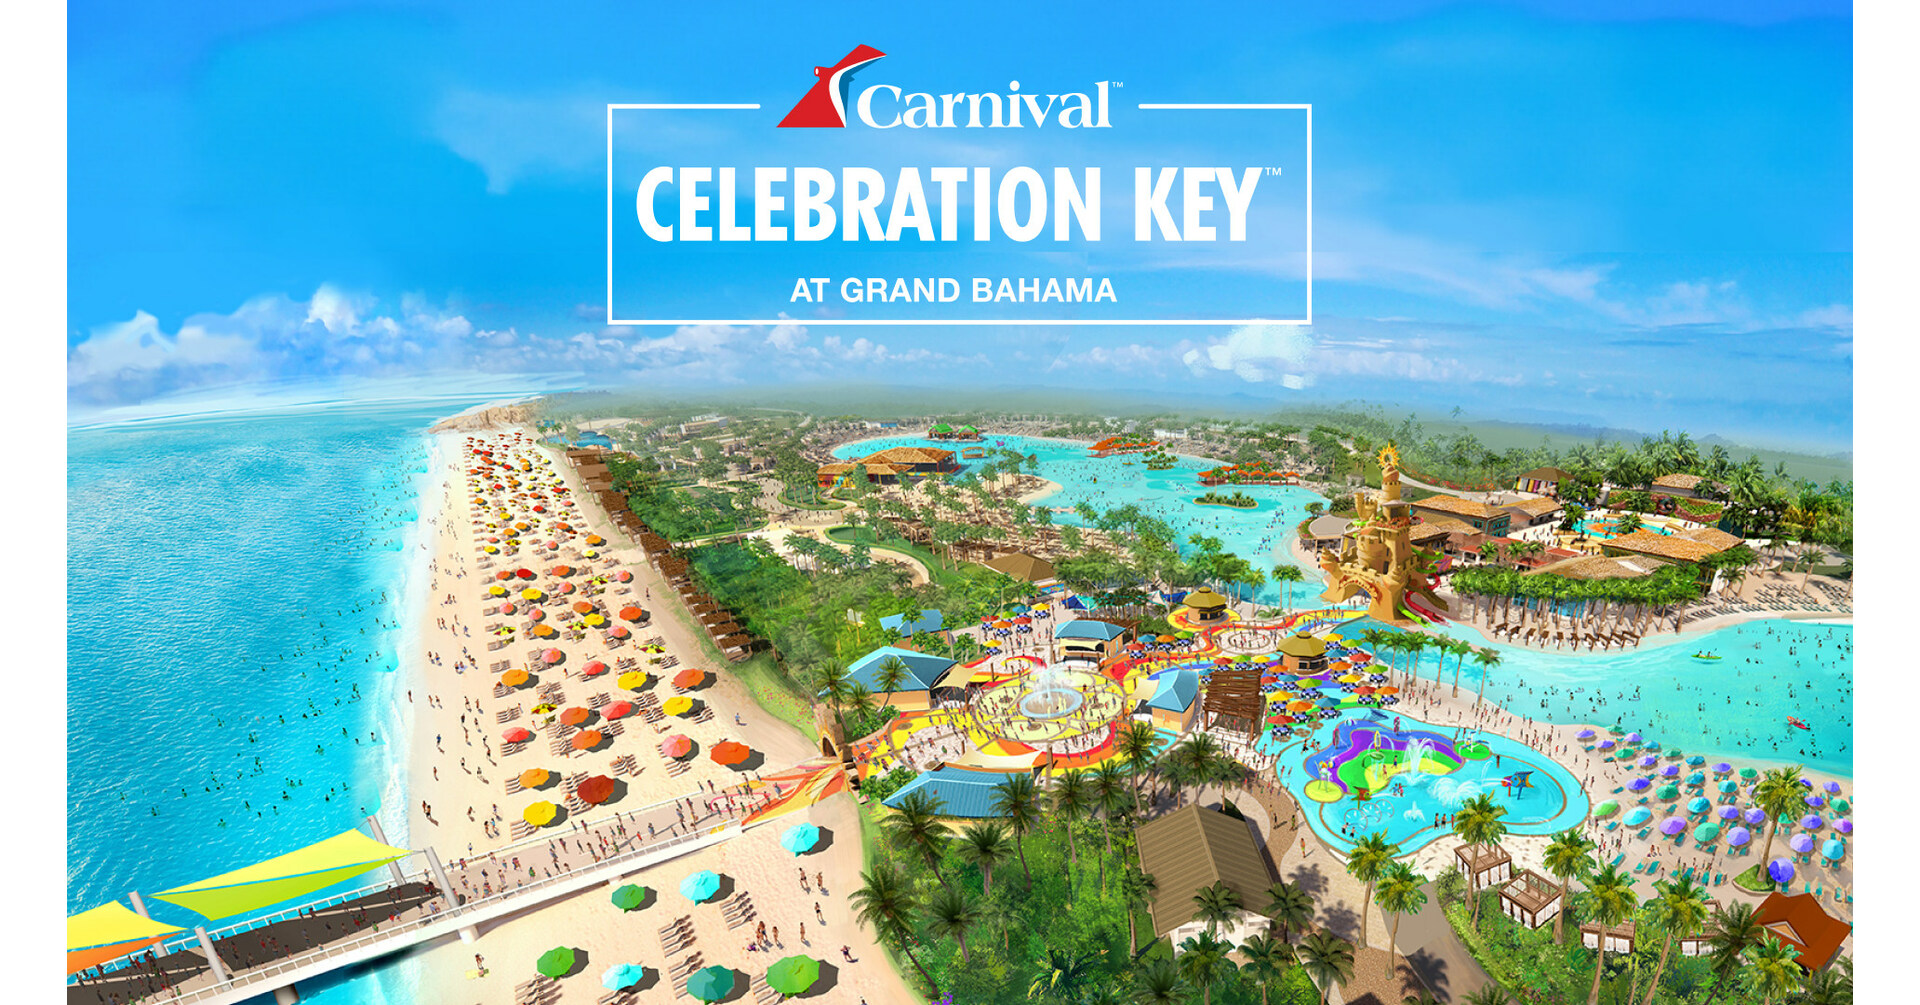 CARNIVAL CRUISE LINE OPENS ITINERARIES FEATURING CELEBRATION KEY™, NEW  GRAND BAHAMA CRUISE PORT DESTINATION